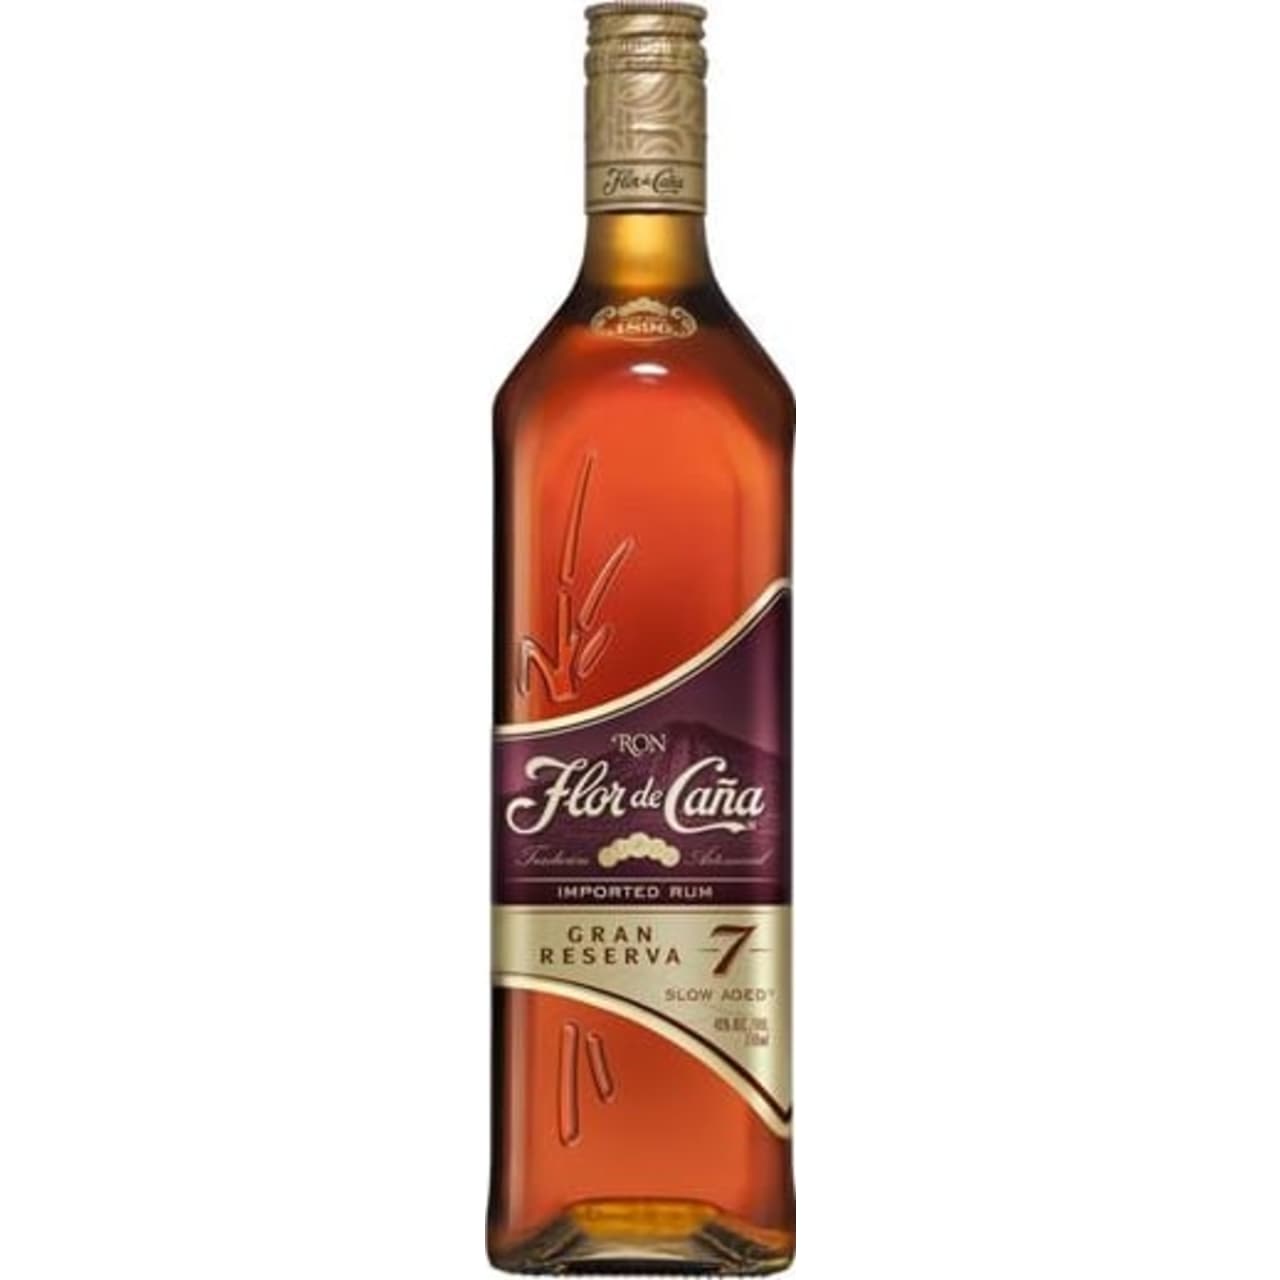 Flor De Caña 7 Gran Reserva has a mahogany color with aromas of toasted coconuts, vanilla and figs and a flavor with notes of honey, dark chocolate and a long smooth finish. Naturally aged in bourbon barrels this gran reserva aged rum contains no artificial ingredients, accelerants or sugar and has a similar calorie content as whisky or vodka.